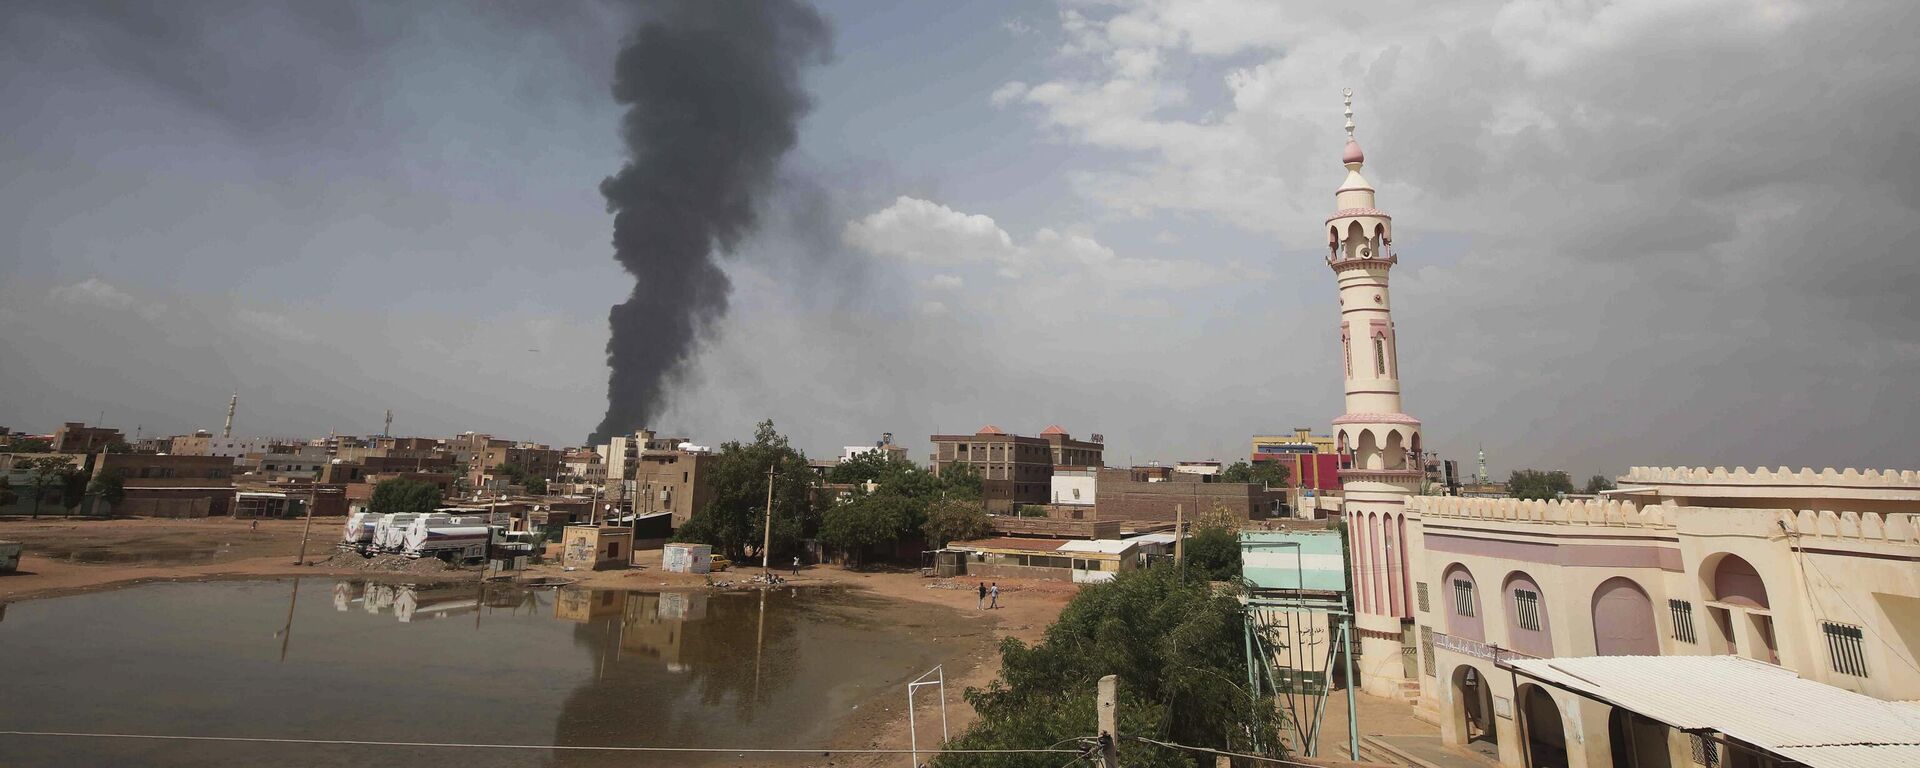 Smoke rises over Khartoum, Sudan, Thursday, June 8, 2023, as fighting between the Sudanese army and paramilitary Rapid Support Forces continues. - Sputnik Africa, 1920, 09.06.2023